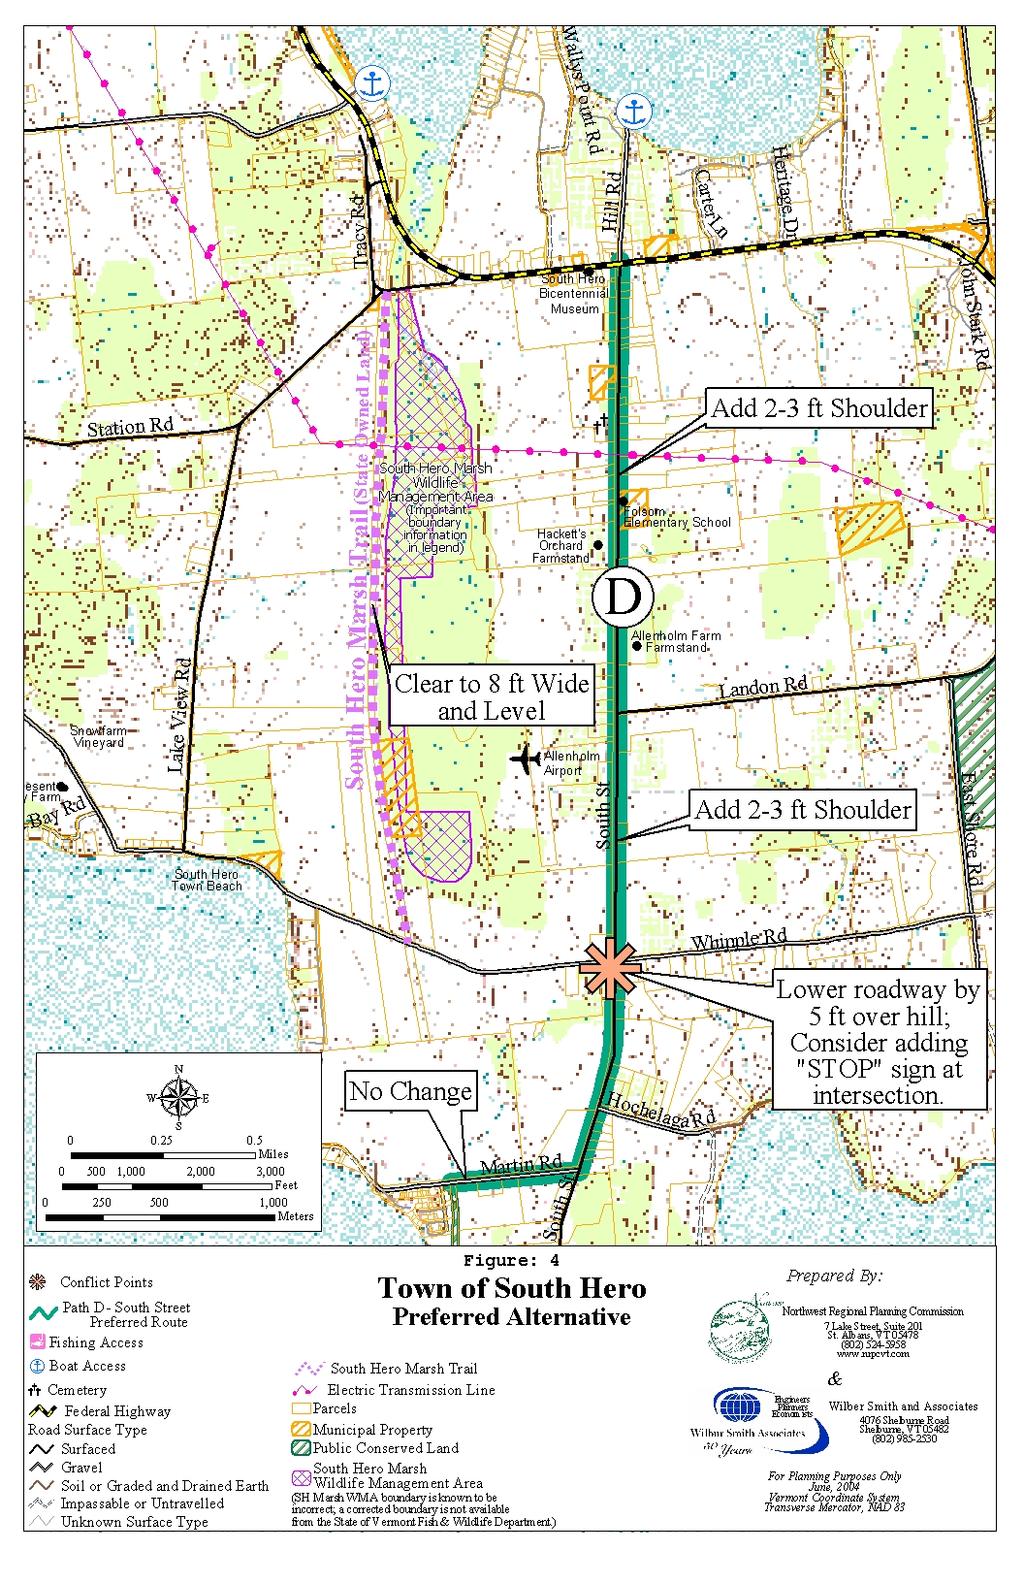 South Hero Village to Allen Point Access Linkage Feasibility and Alignment Study